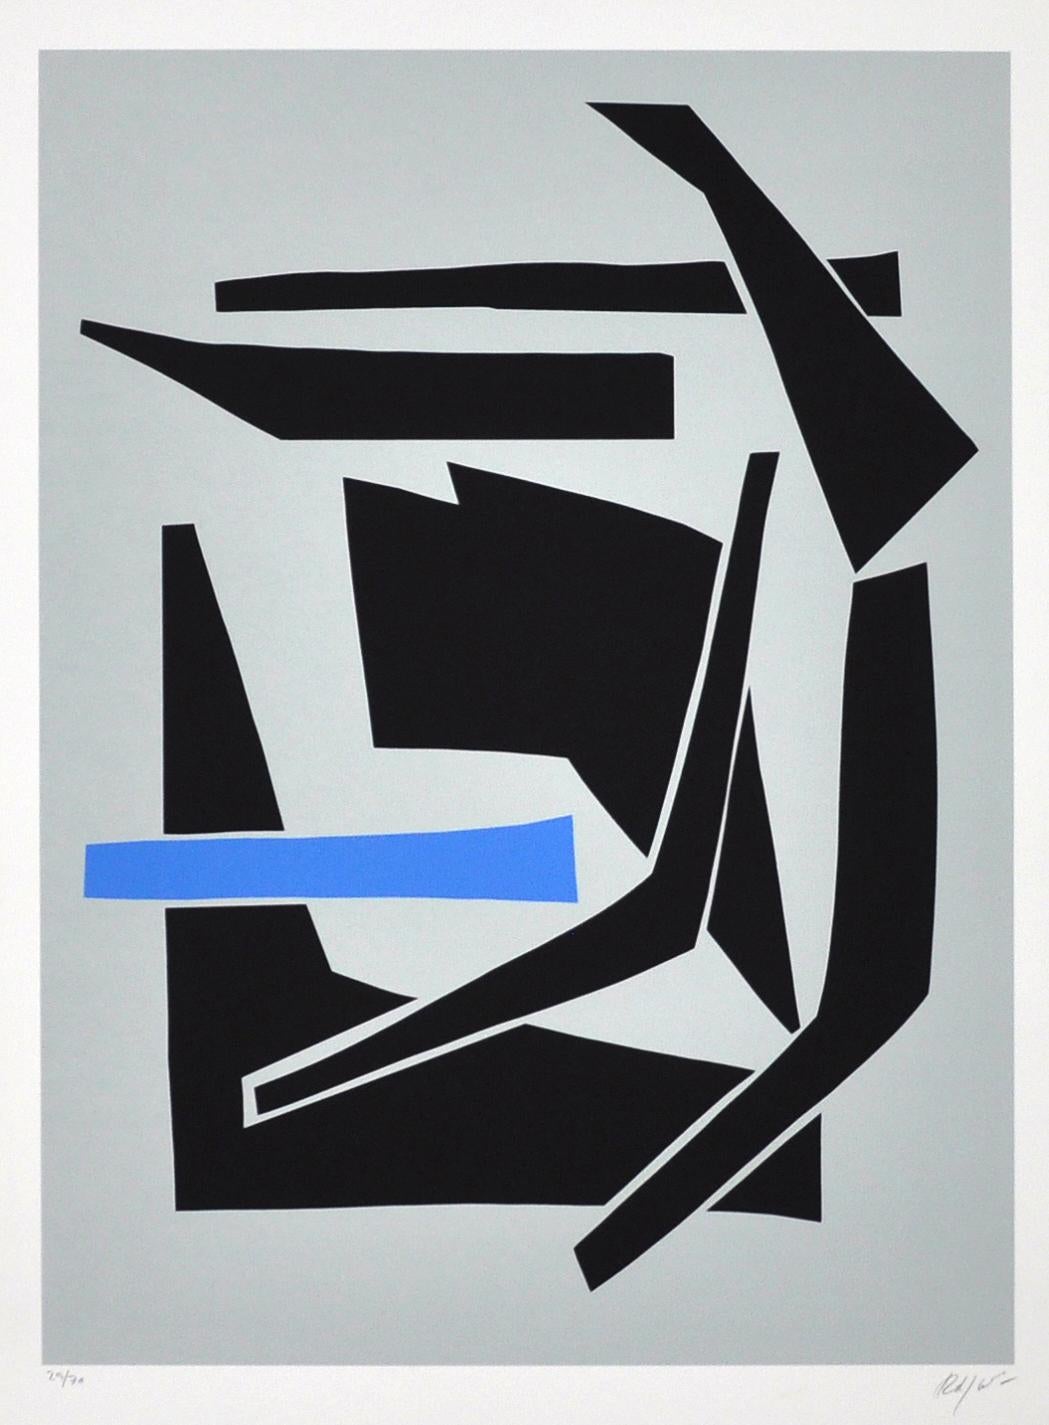 Screen Print by Robert Jacobsen, Untitled, late 1980s
Numbered 29/70, signed.  73 cm H x 54 cm W, unframed.

Robert Jacobsen was a Danish artist who was self-taught as a sculptor and graphic artist and is represented in museums and public places all